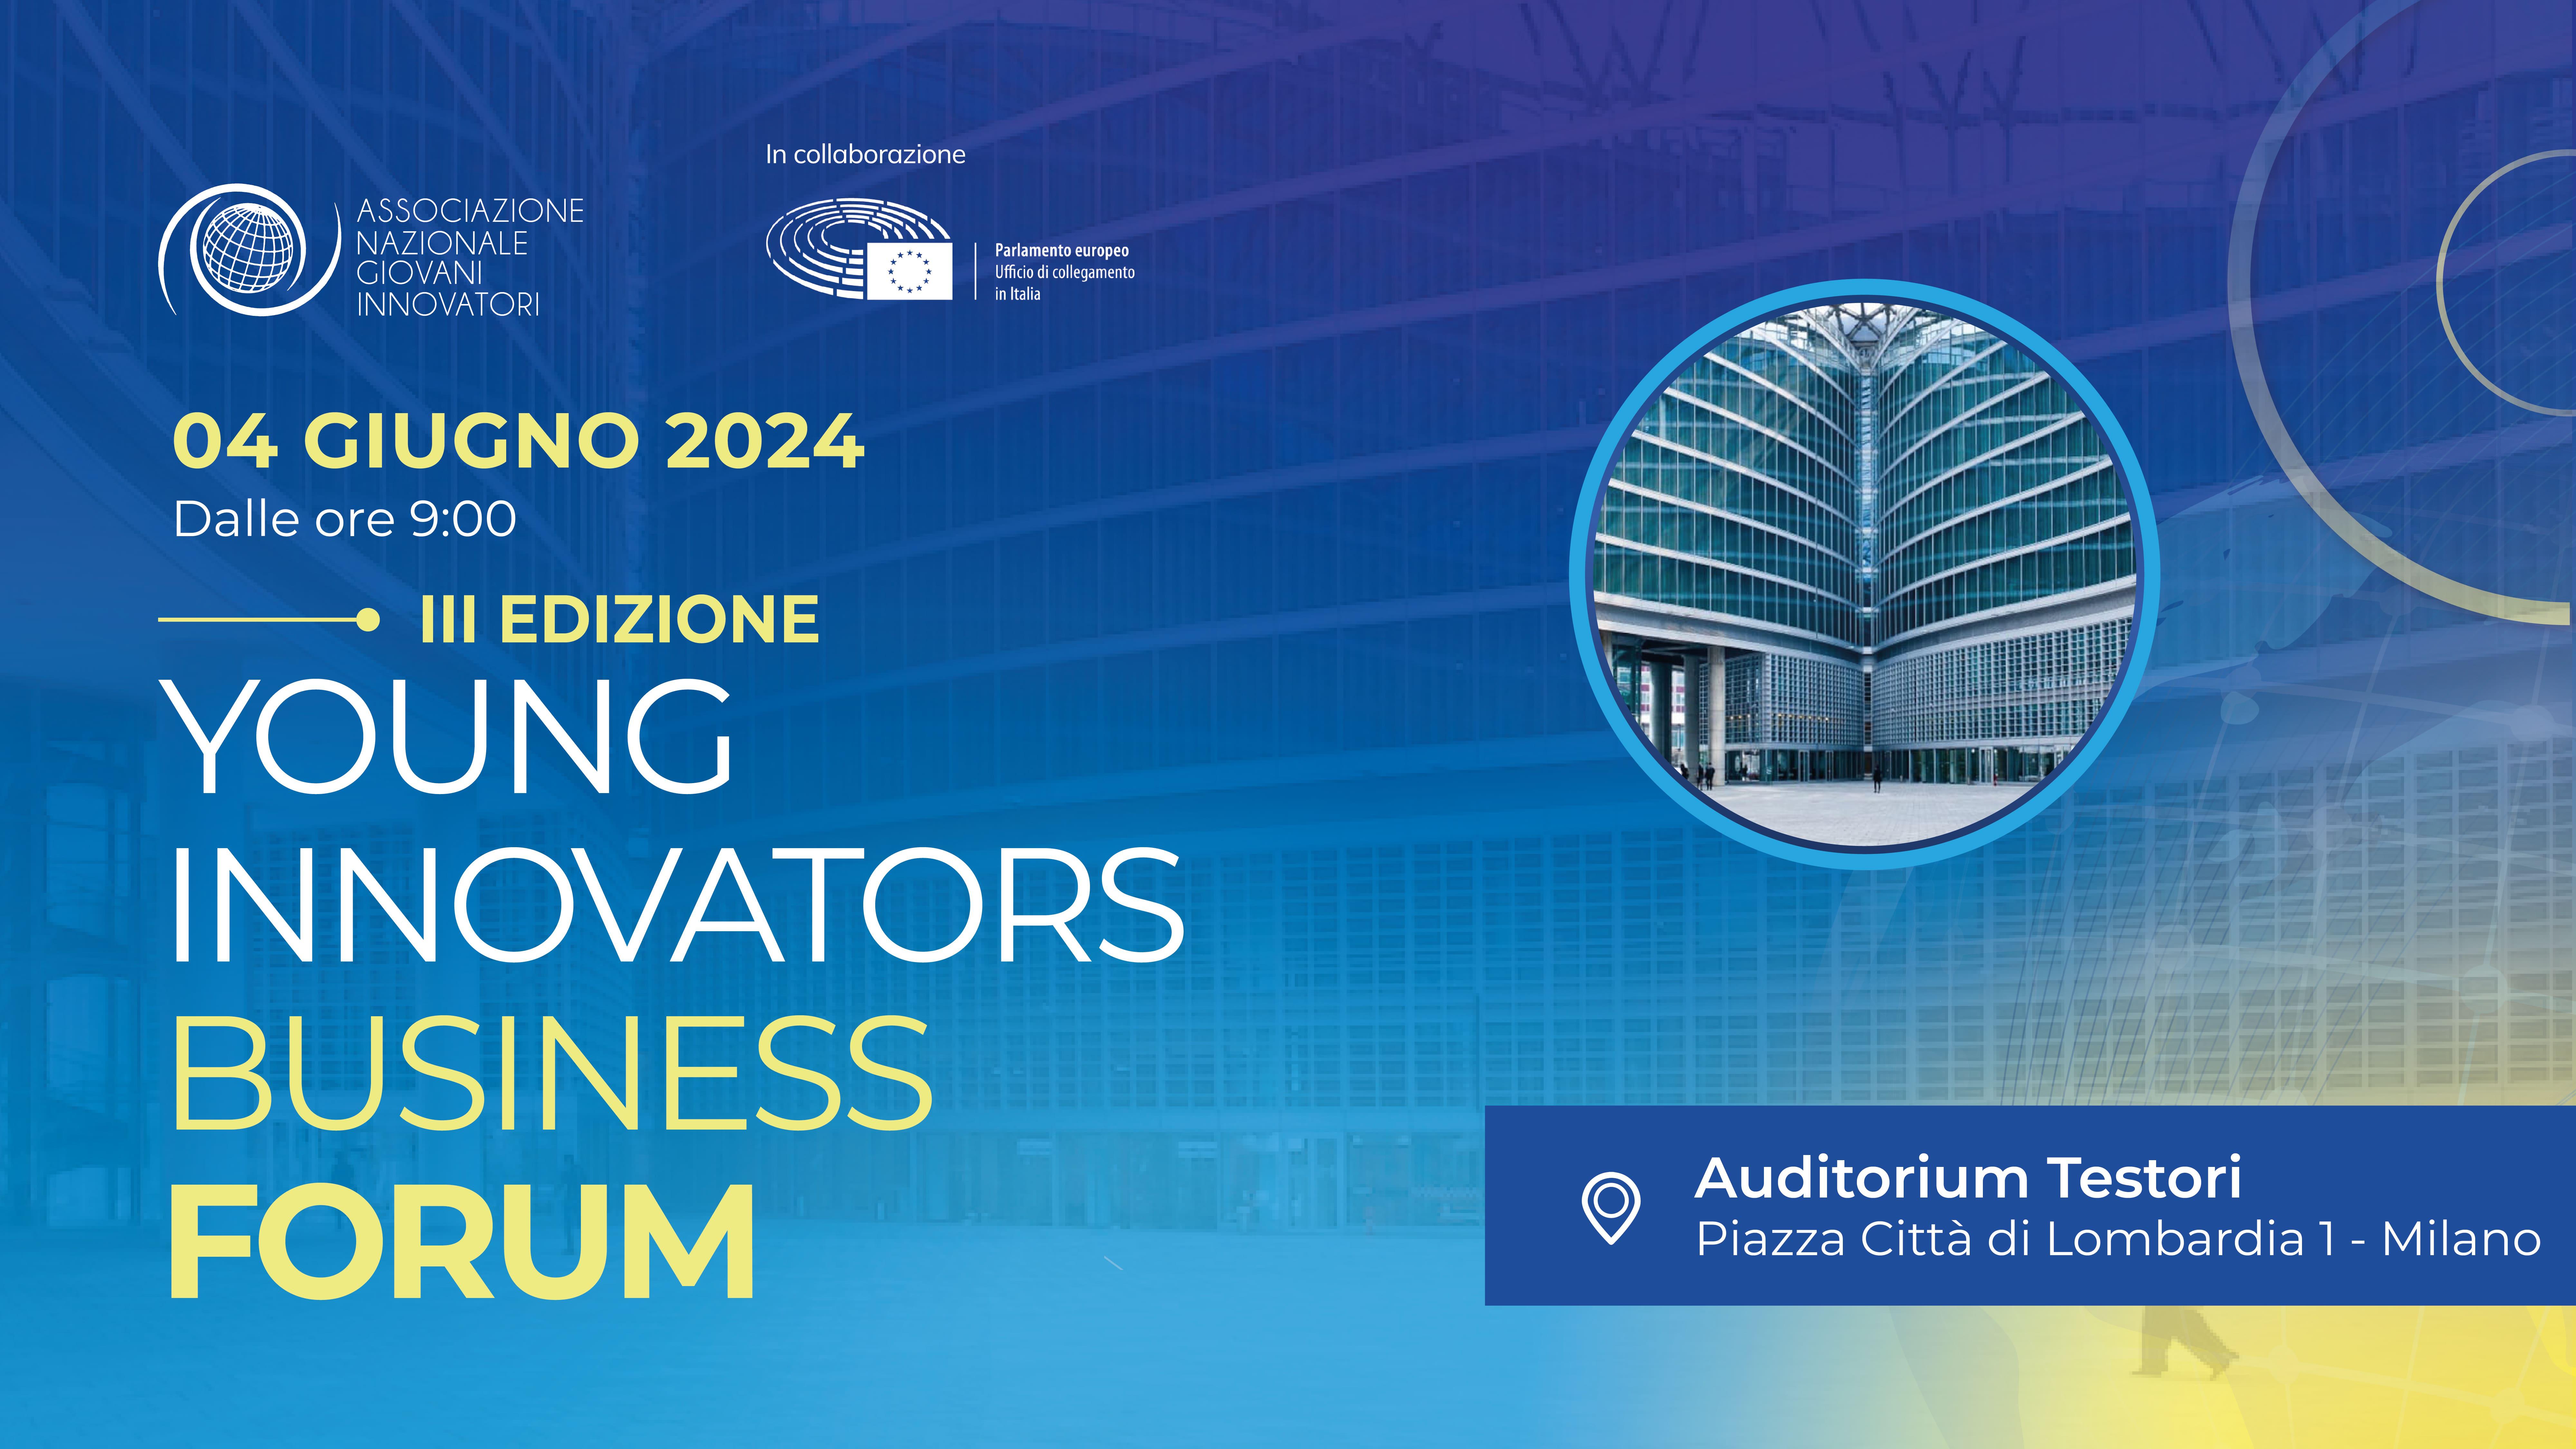 Milan, the capital of innovation, hosts the third edition of the Young Innovators Business Forum